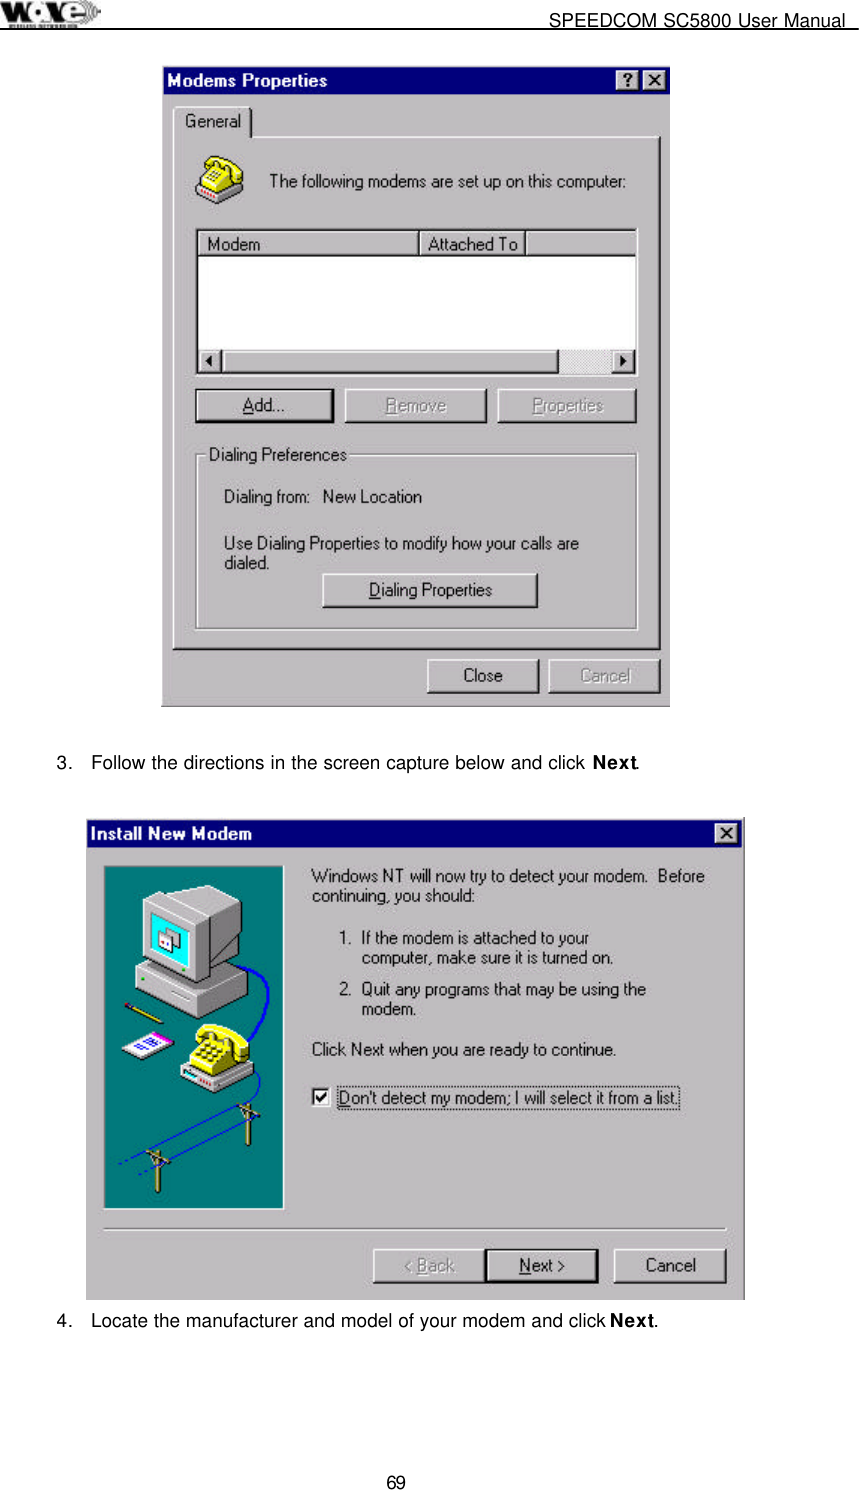     SPEEDCOM SC5800 User Manual  69   3.  Follow the directions in the screen capture below and click Next.   4.  Locate the manufacturer and model of your modem and click Next.  